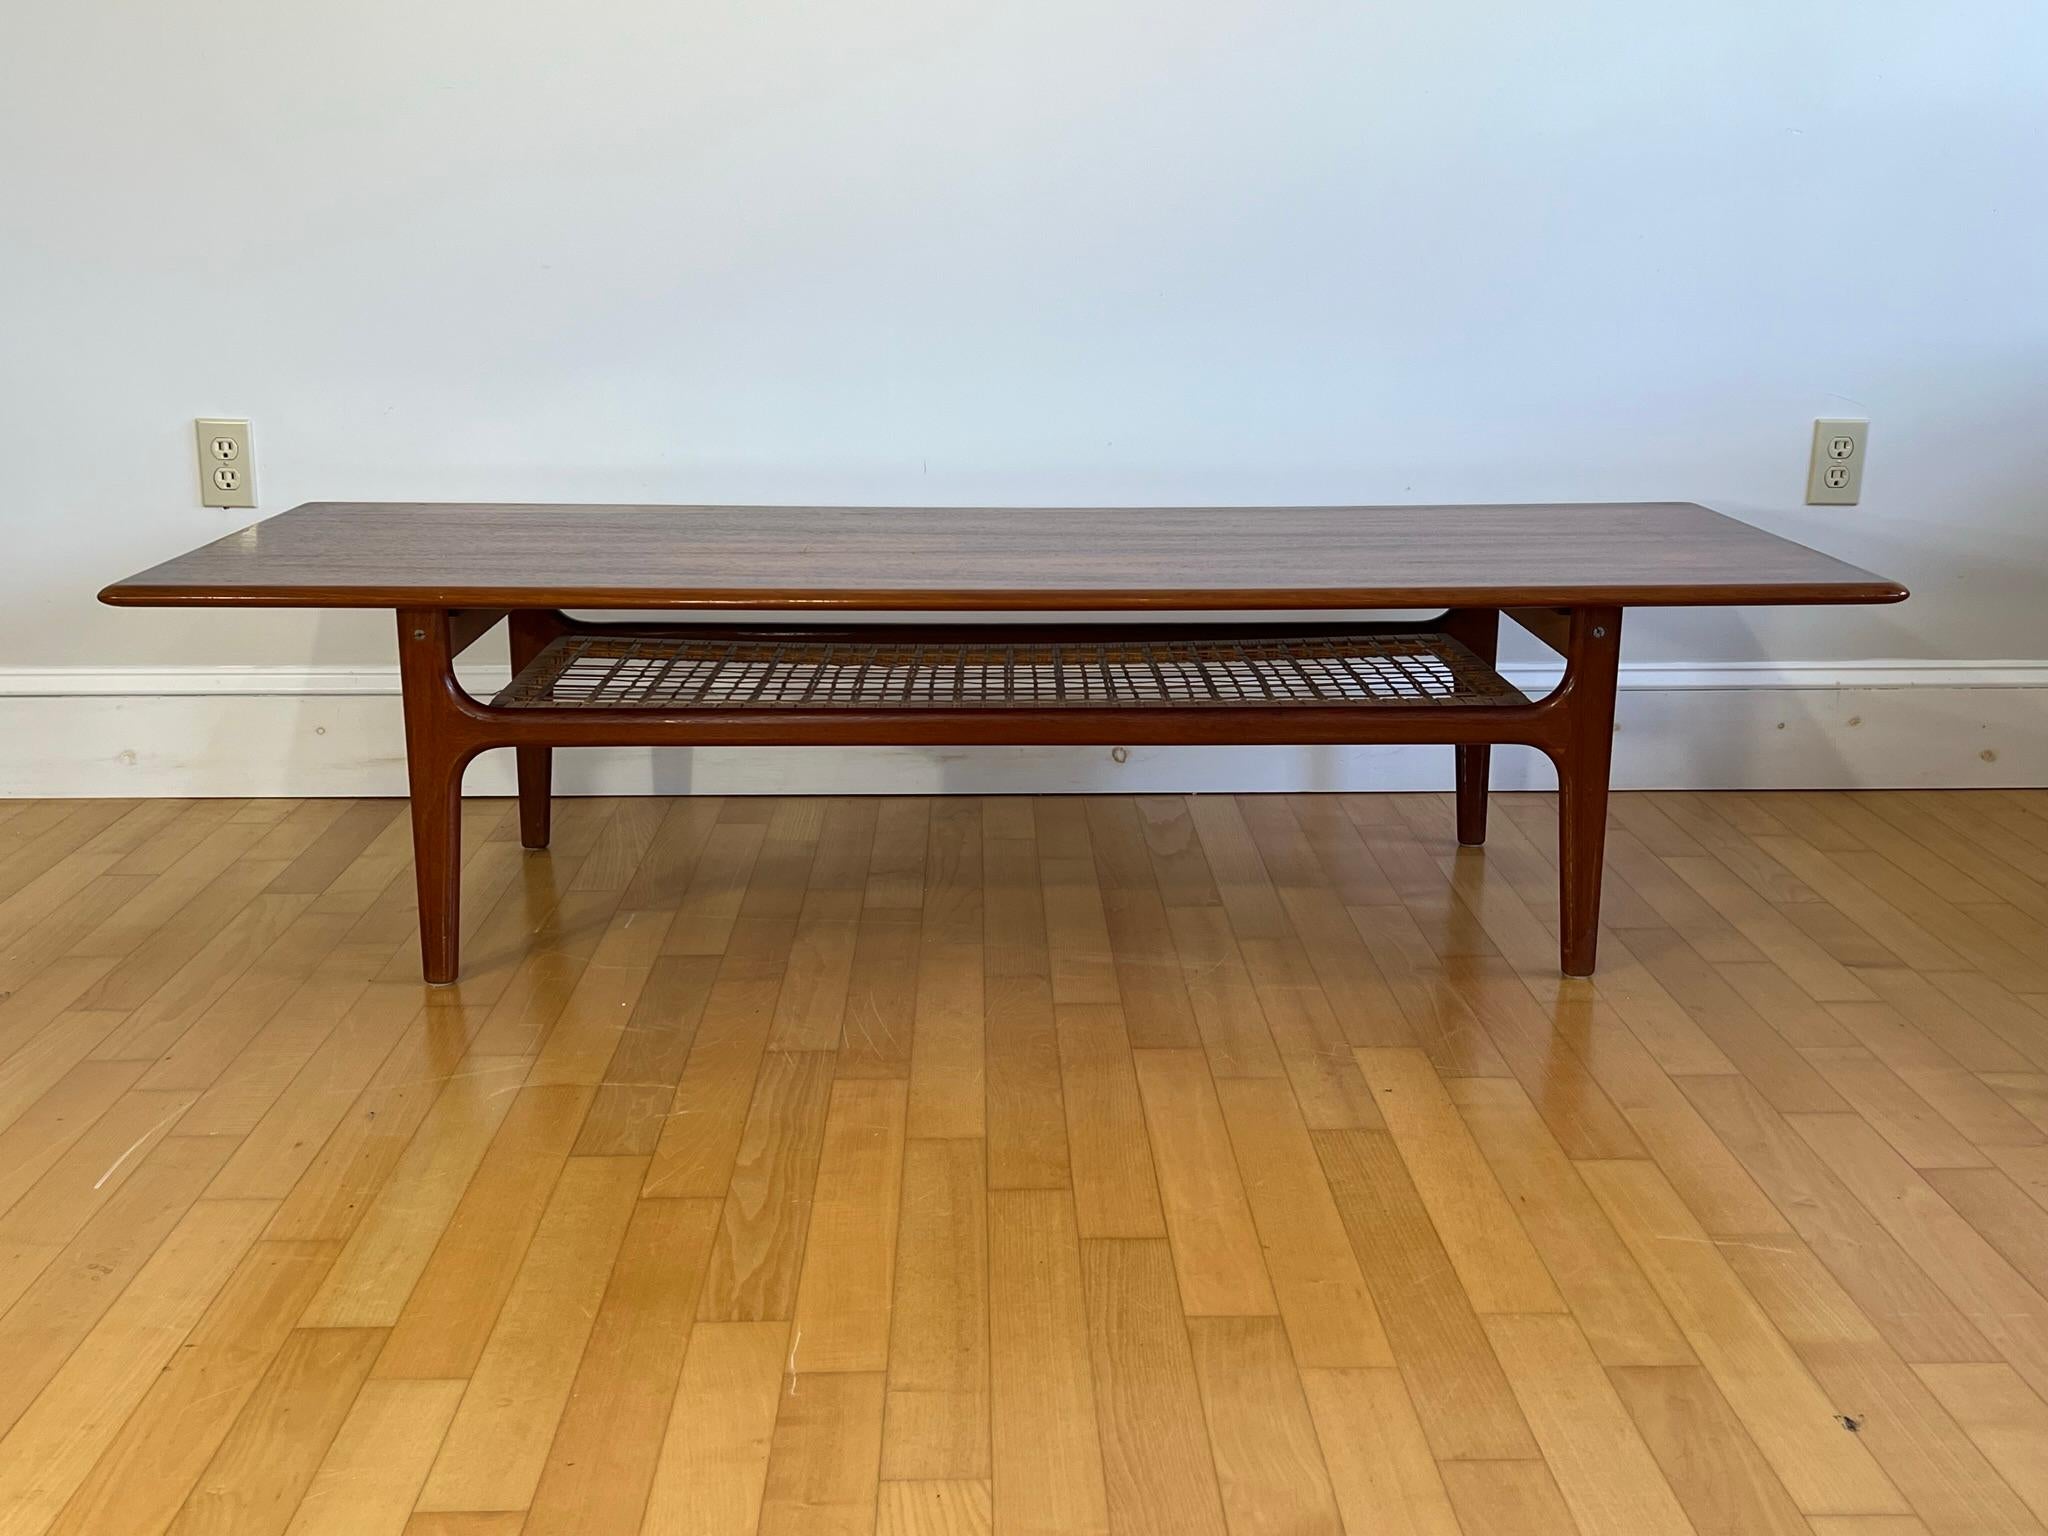 Danish Modern Teak and Cane Coffee Table, attrib. to Trioh, Denmark, 1960s In Excellent Condition For Sale In Belmont, MA